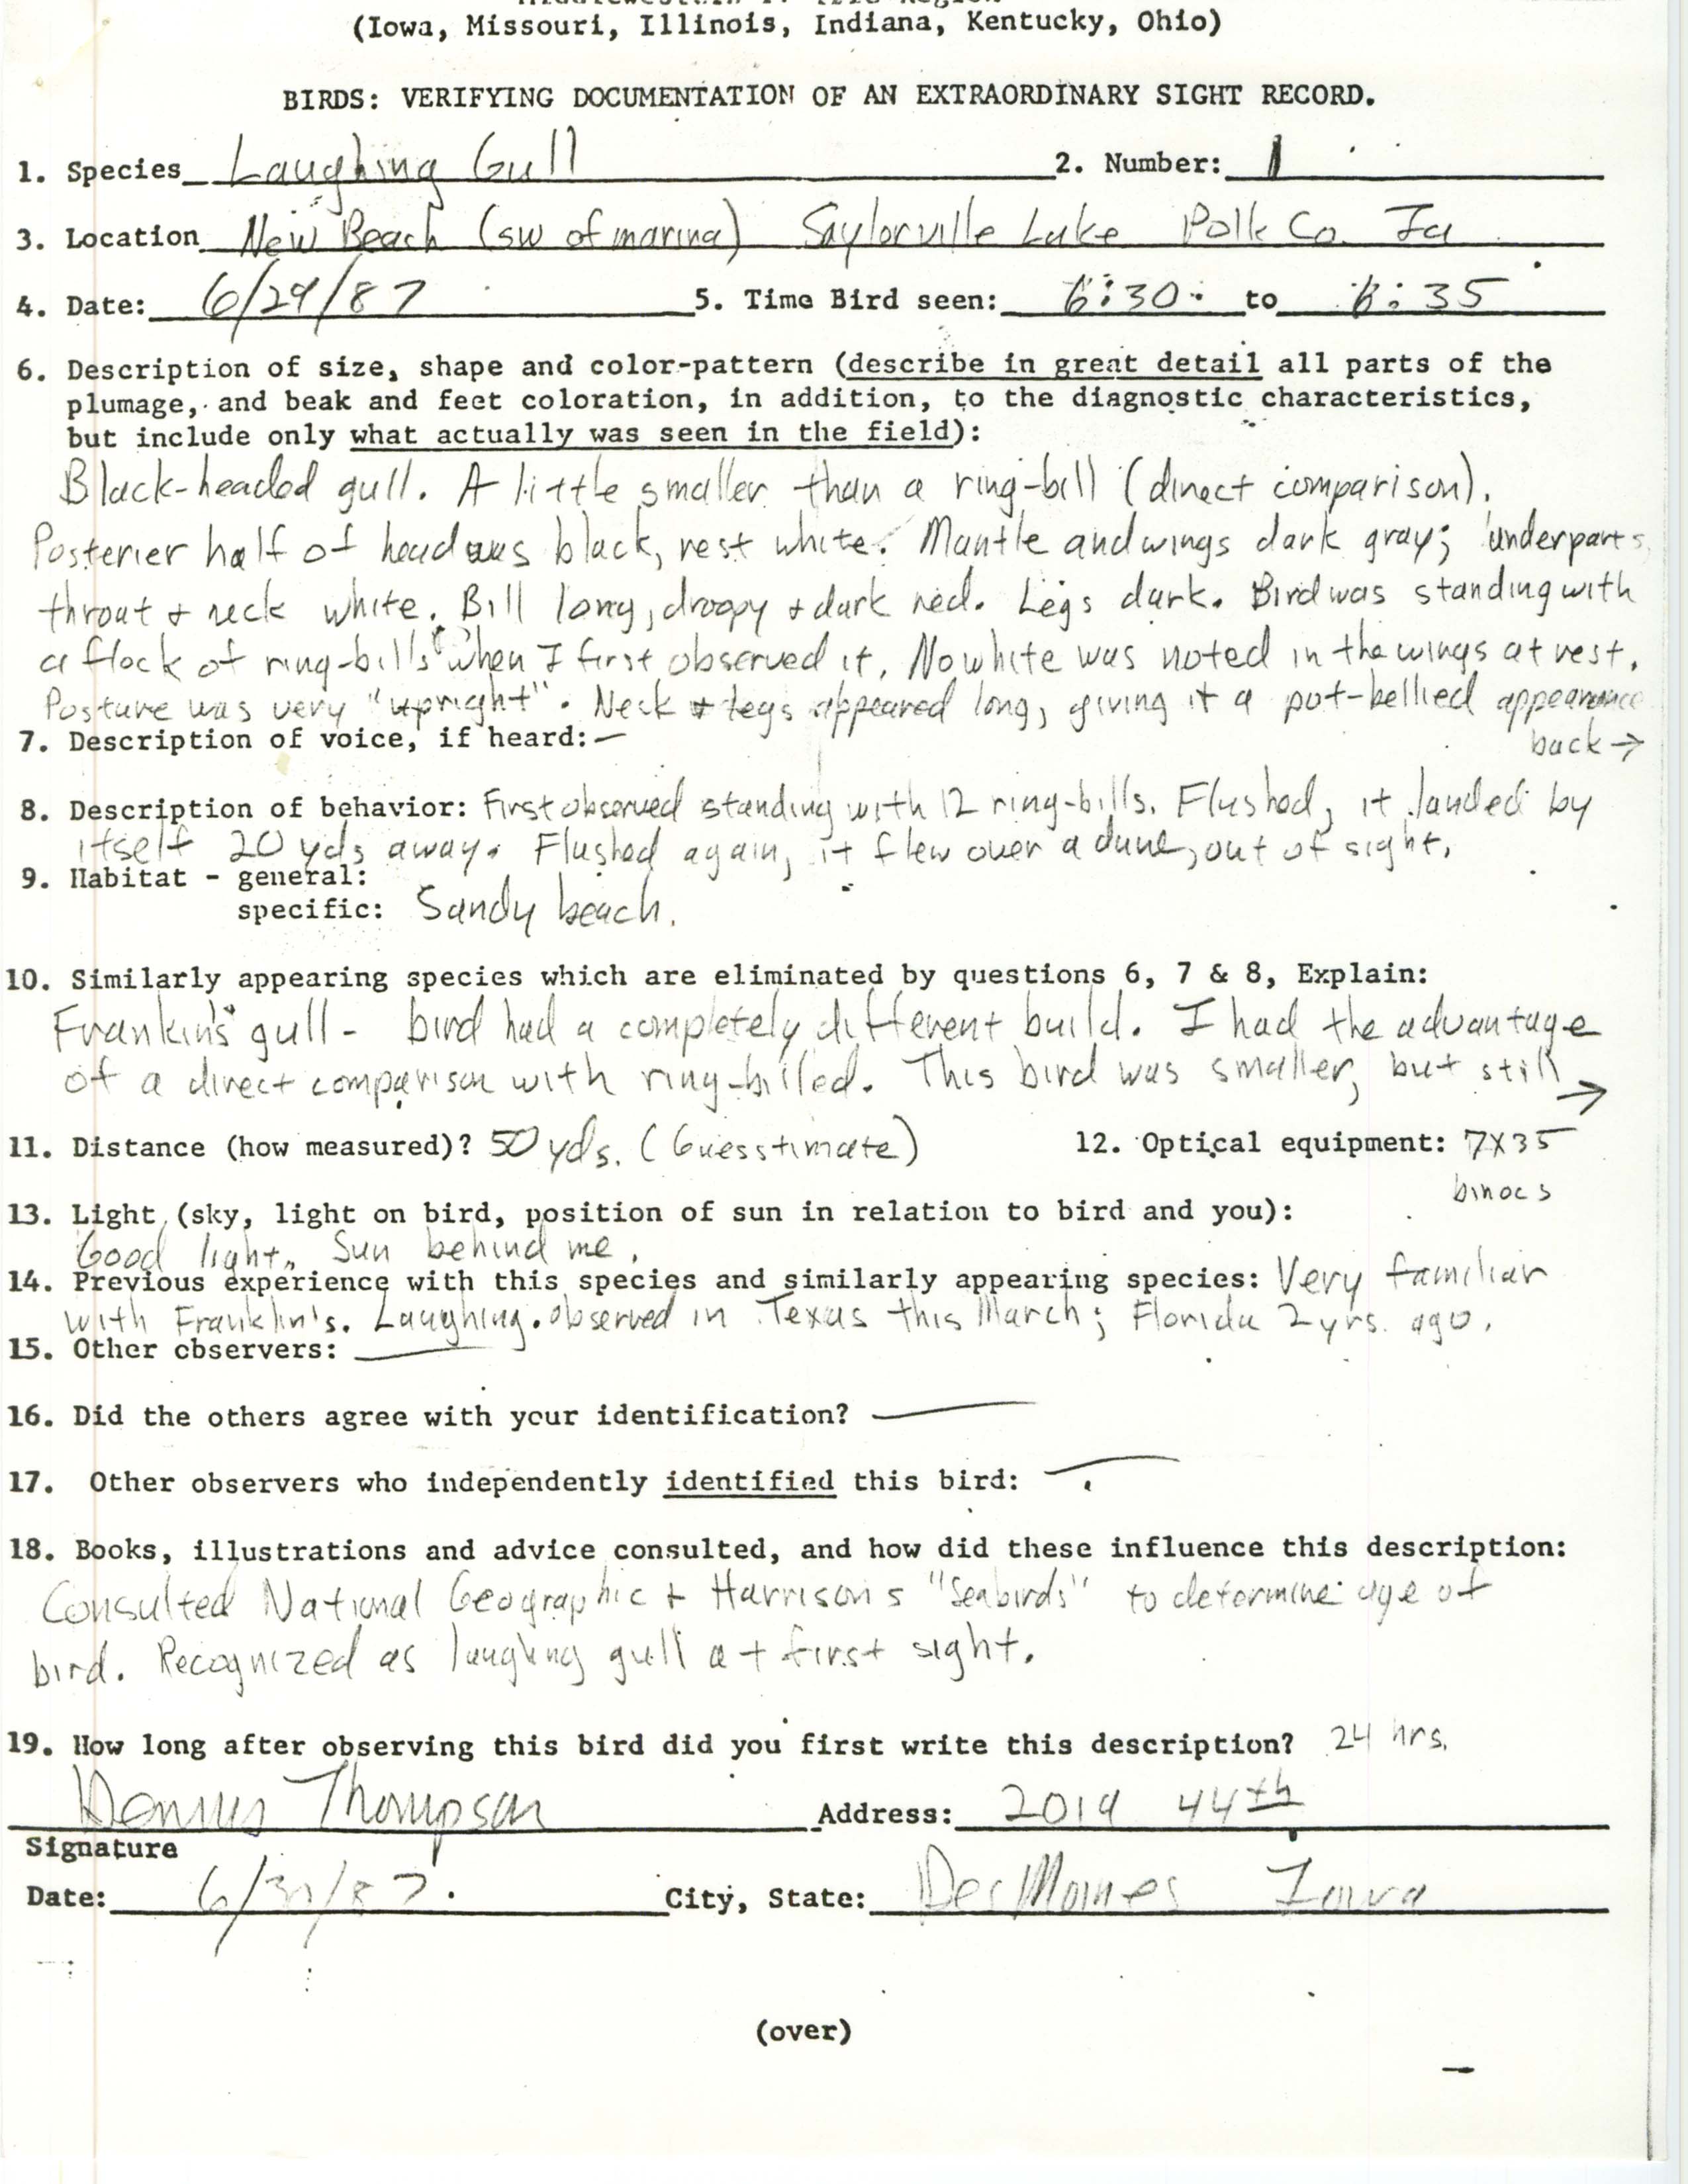 Rare bird documentation form for Laughing Gull at Saylorville Lake, 1987